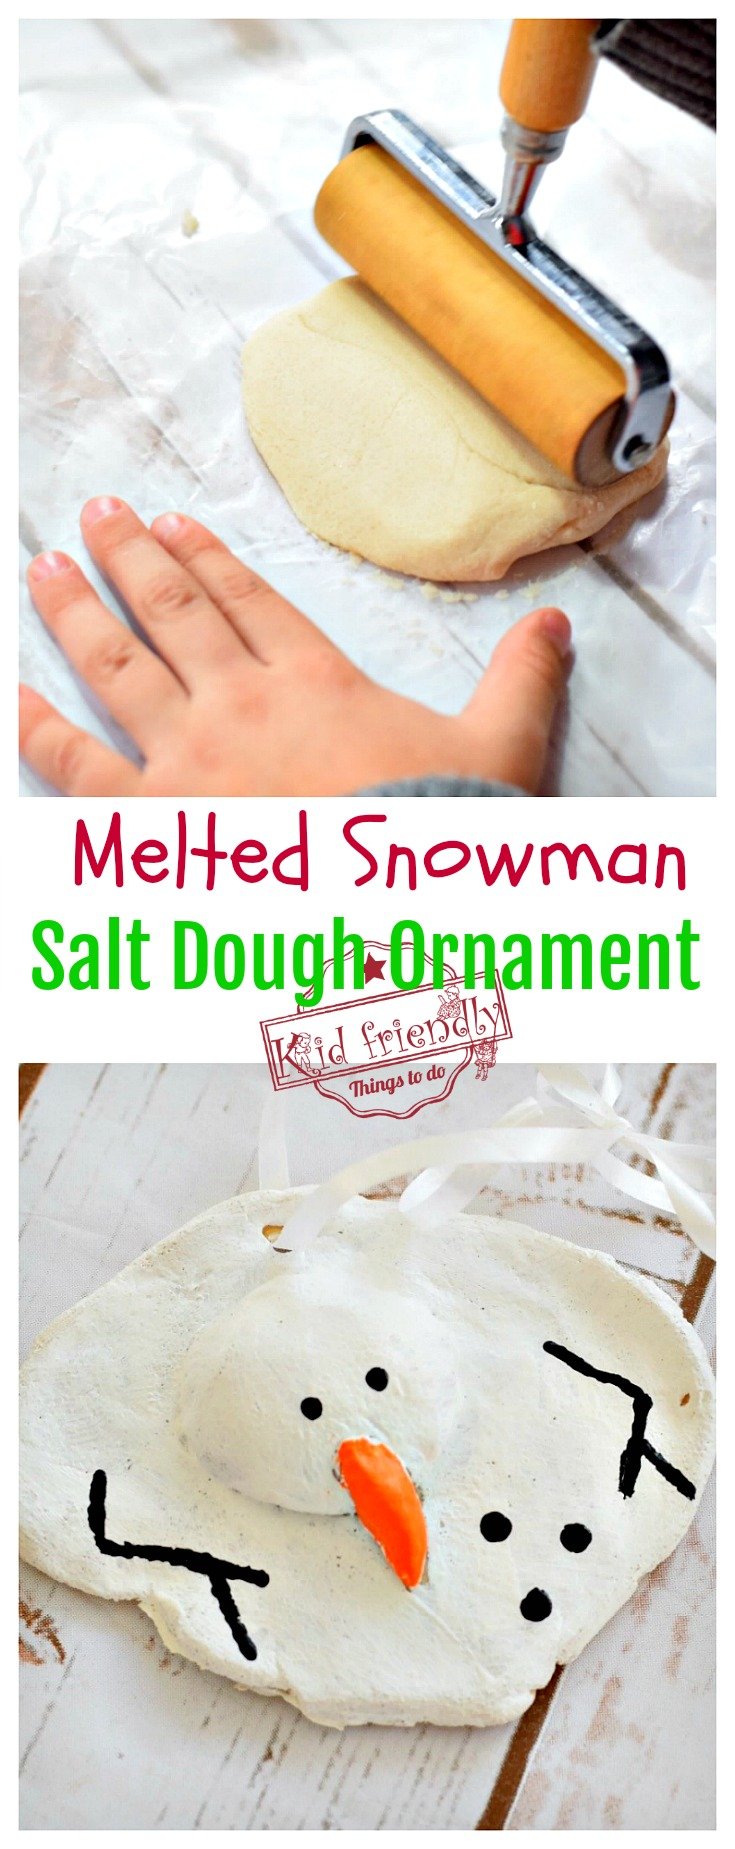 A DIY Melted Snowman and Candy Cane Salt Dough Ornament Idea and Recipe for Christmas with Kids, teens and adults - www.kidfriendlythingstodo.com